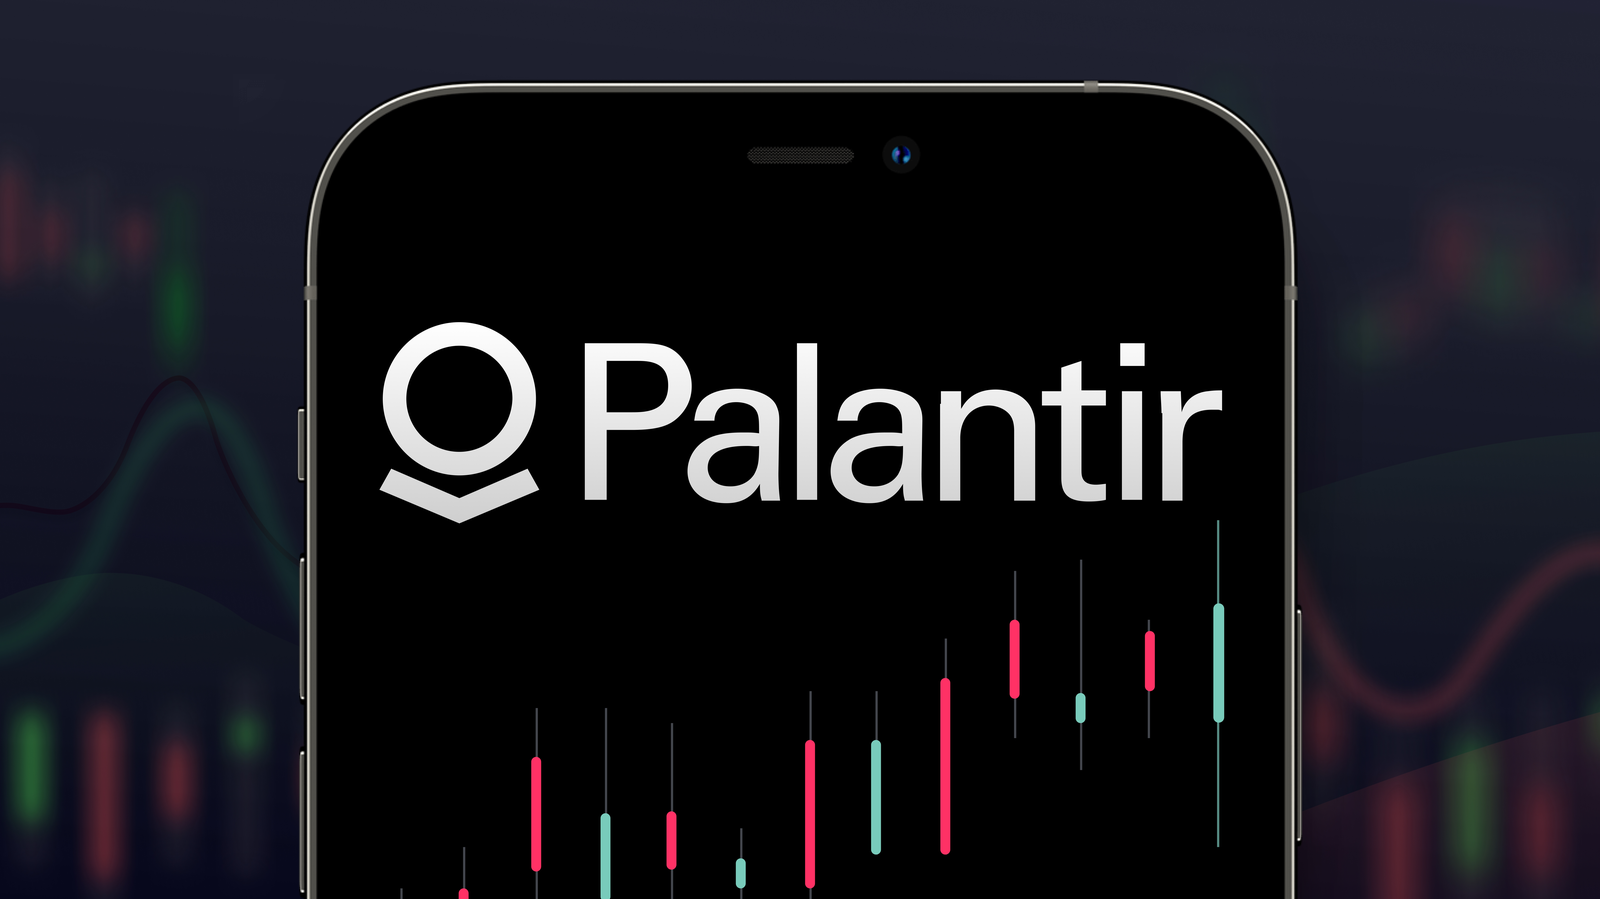 Palantir (PLTR Stock) logo in a smartphone with a series of stock charts on the background.